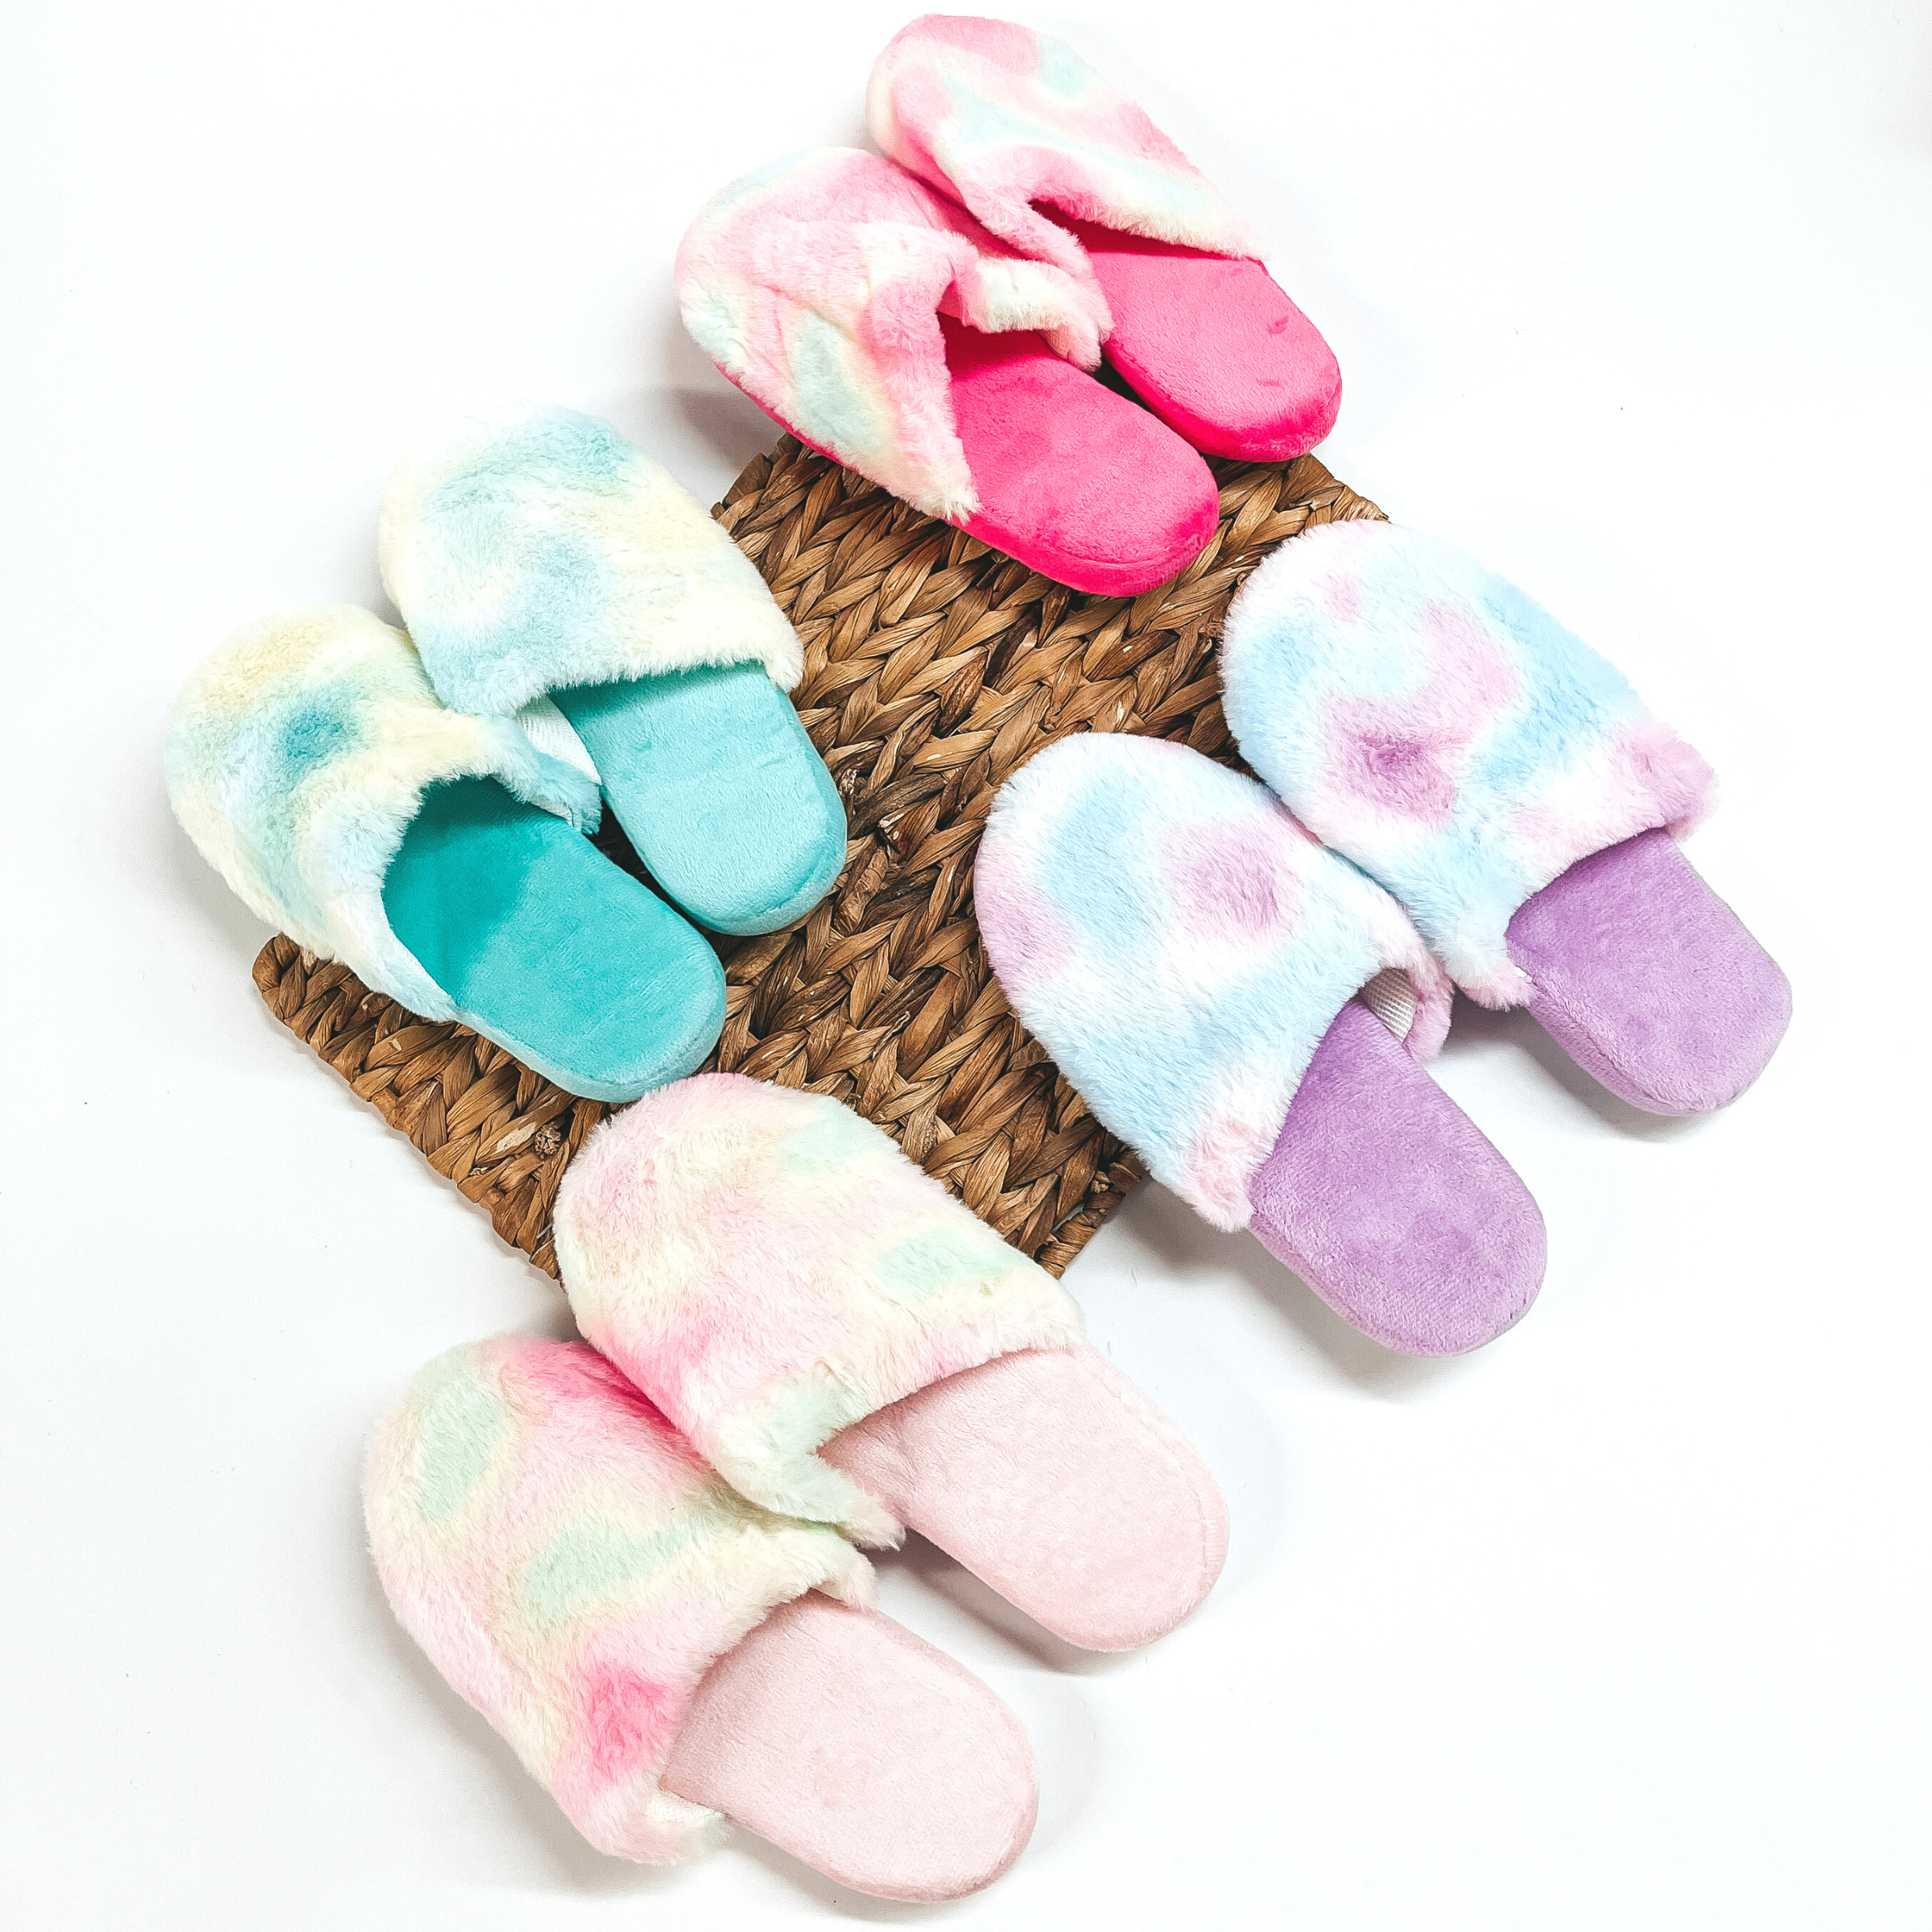 There are four pairs of fluffy tie dye slippers in hot pink, teal, purple,  and light pink. All slippers are placed on a brown woven slate and on a white  background.